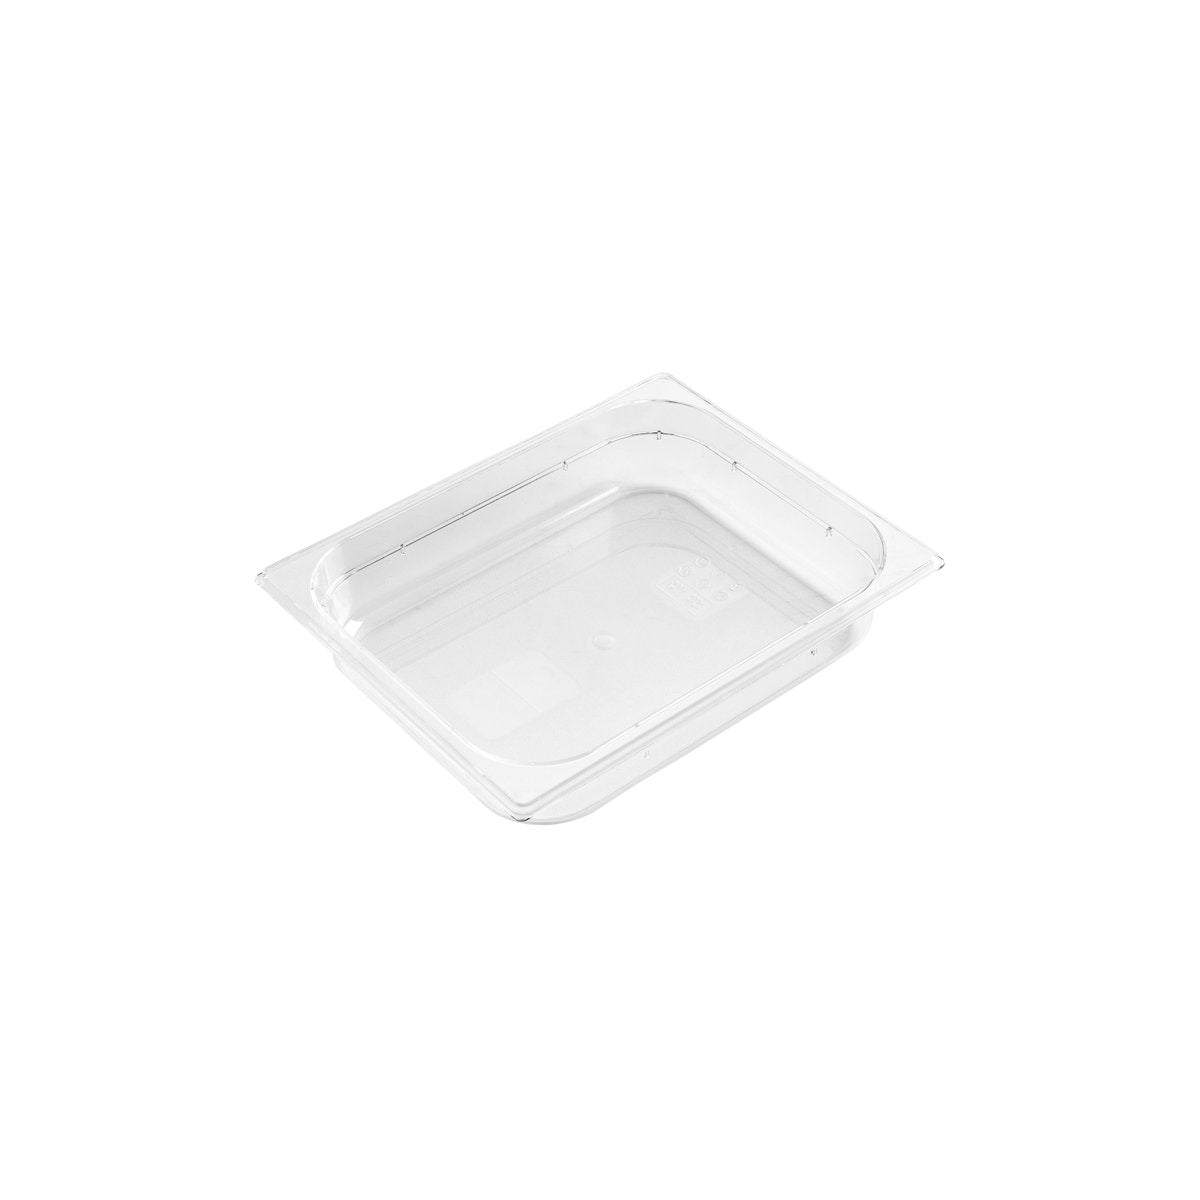 PC-12100CL Inox Macel Gastronorm Pan Polycarbonate Clear 1/2 Size 100mm Tomkin Australia Hospitality Supplies